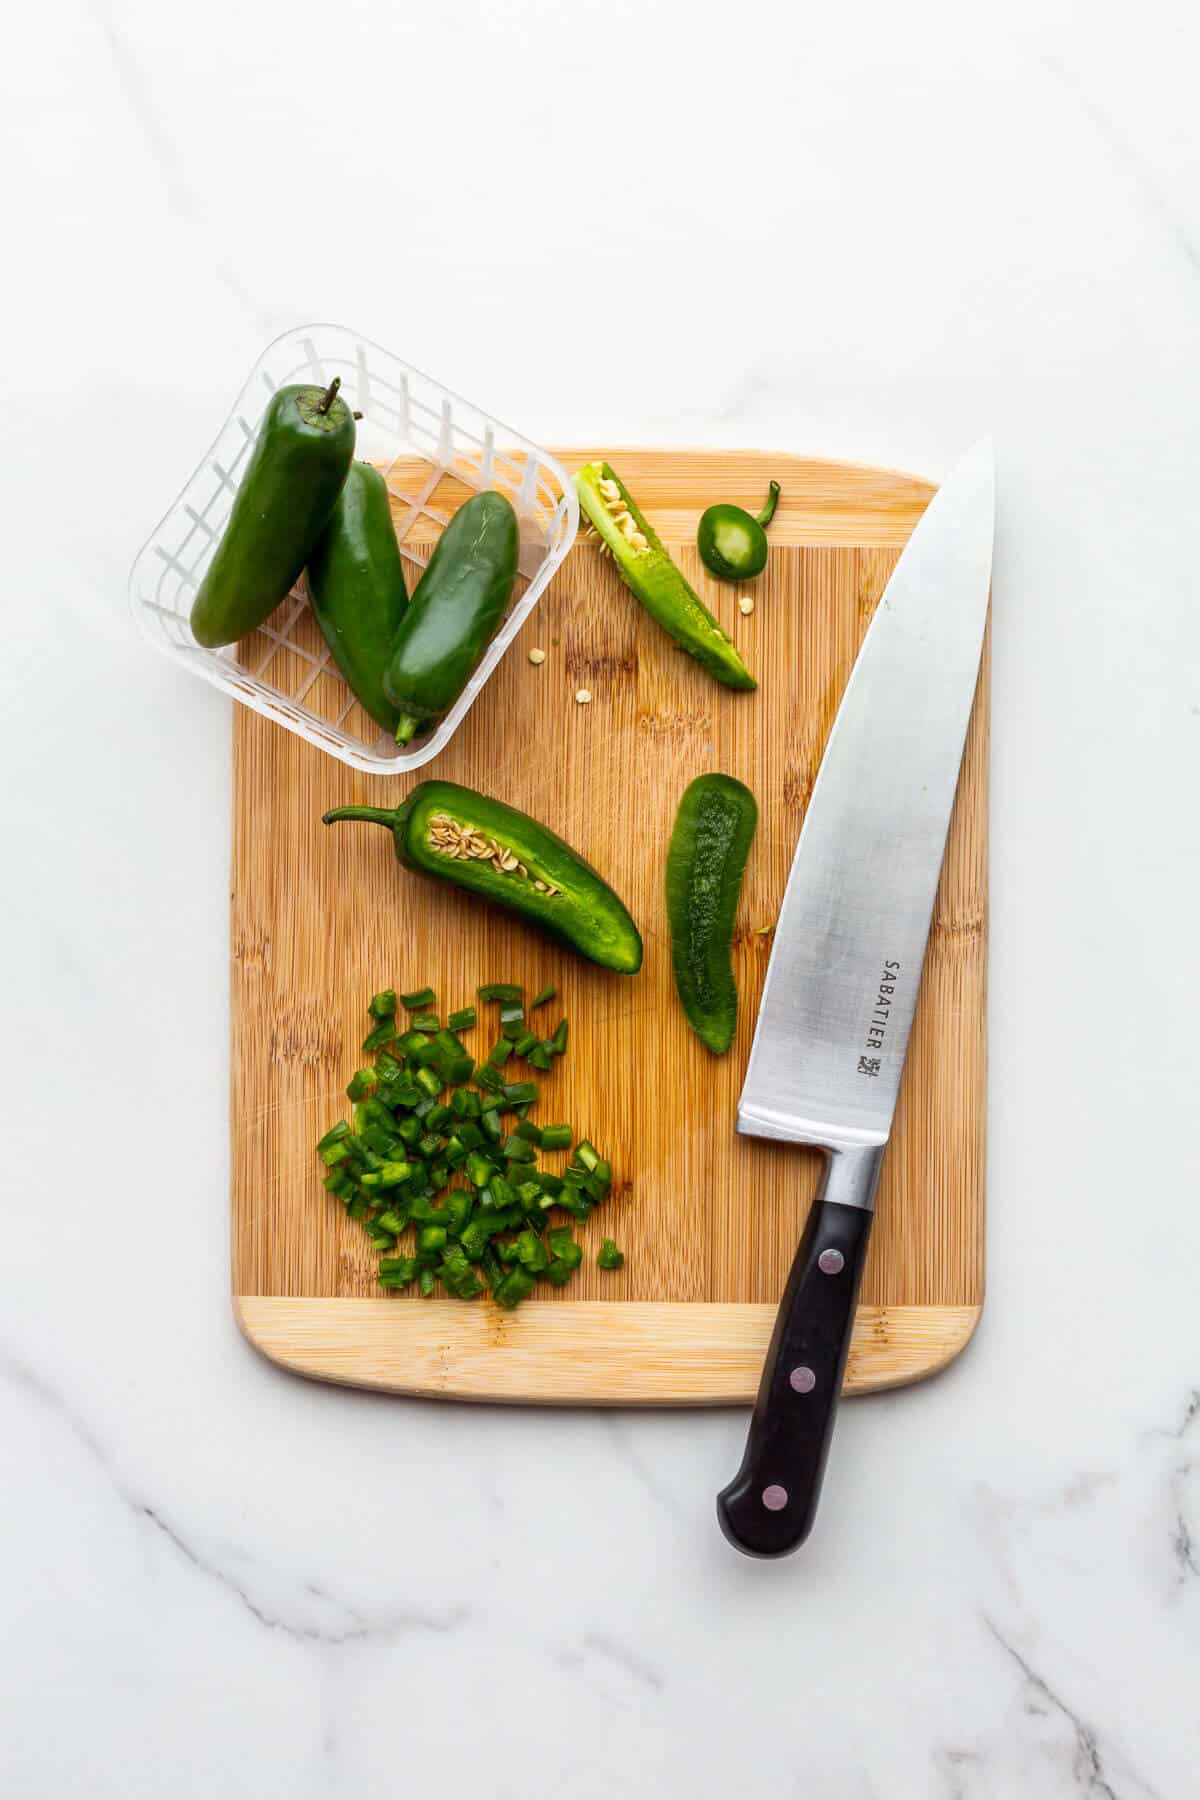 Dicing fresh jalapeño peppers on a wooden cutting board.